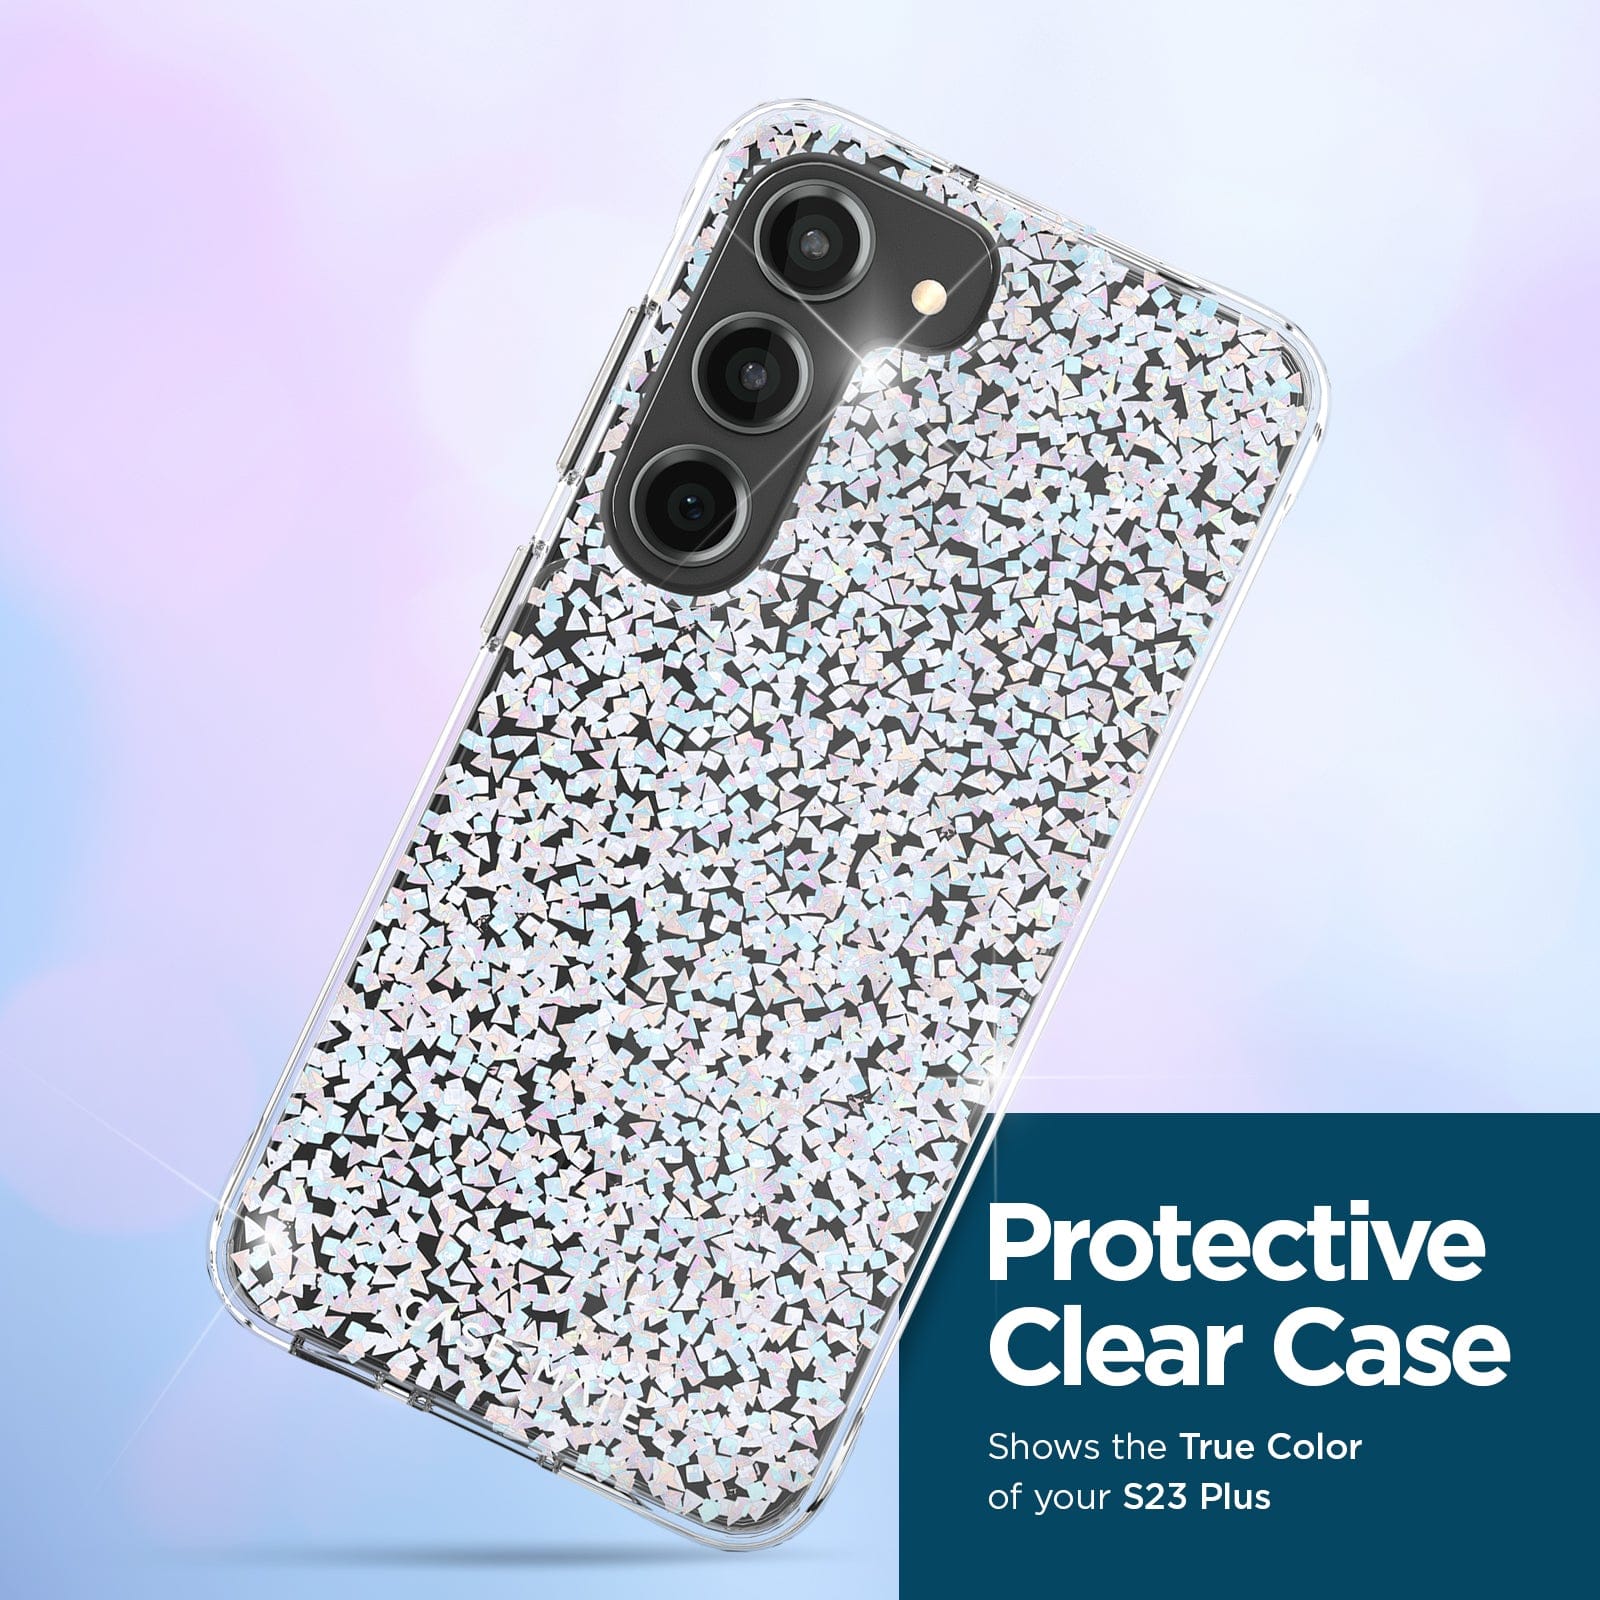 PROTECTIVE CLEAR CASE. SHOWS THE TRUE COLOR OF YOUR S23+